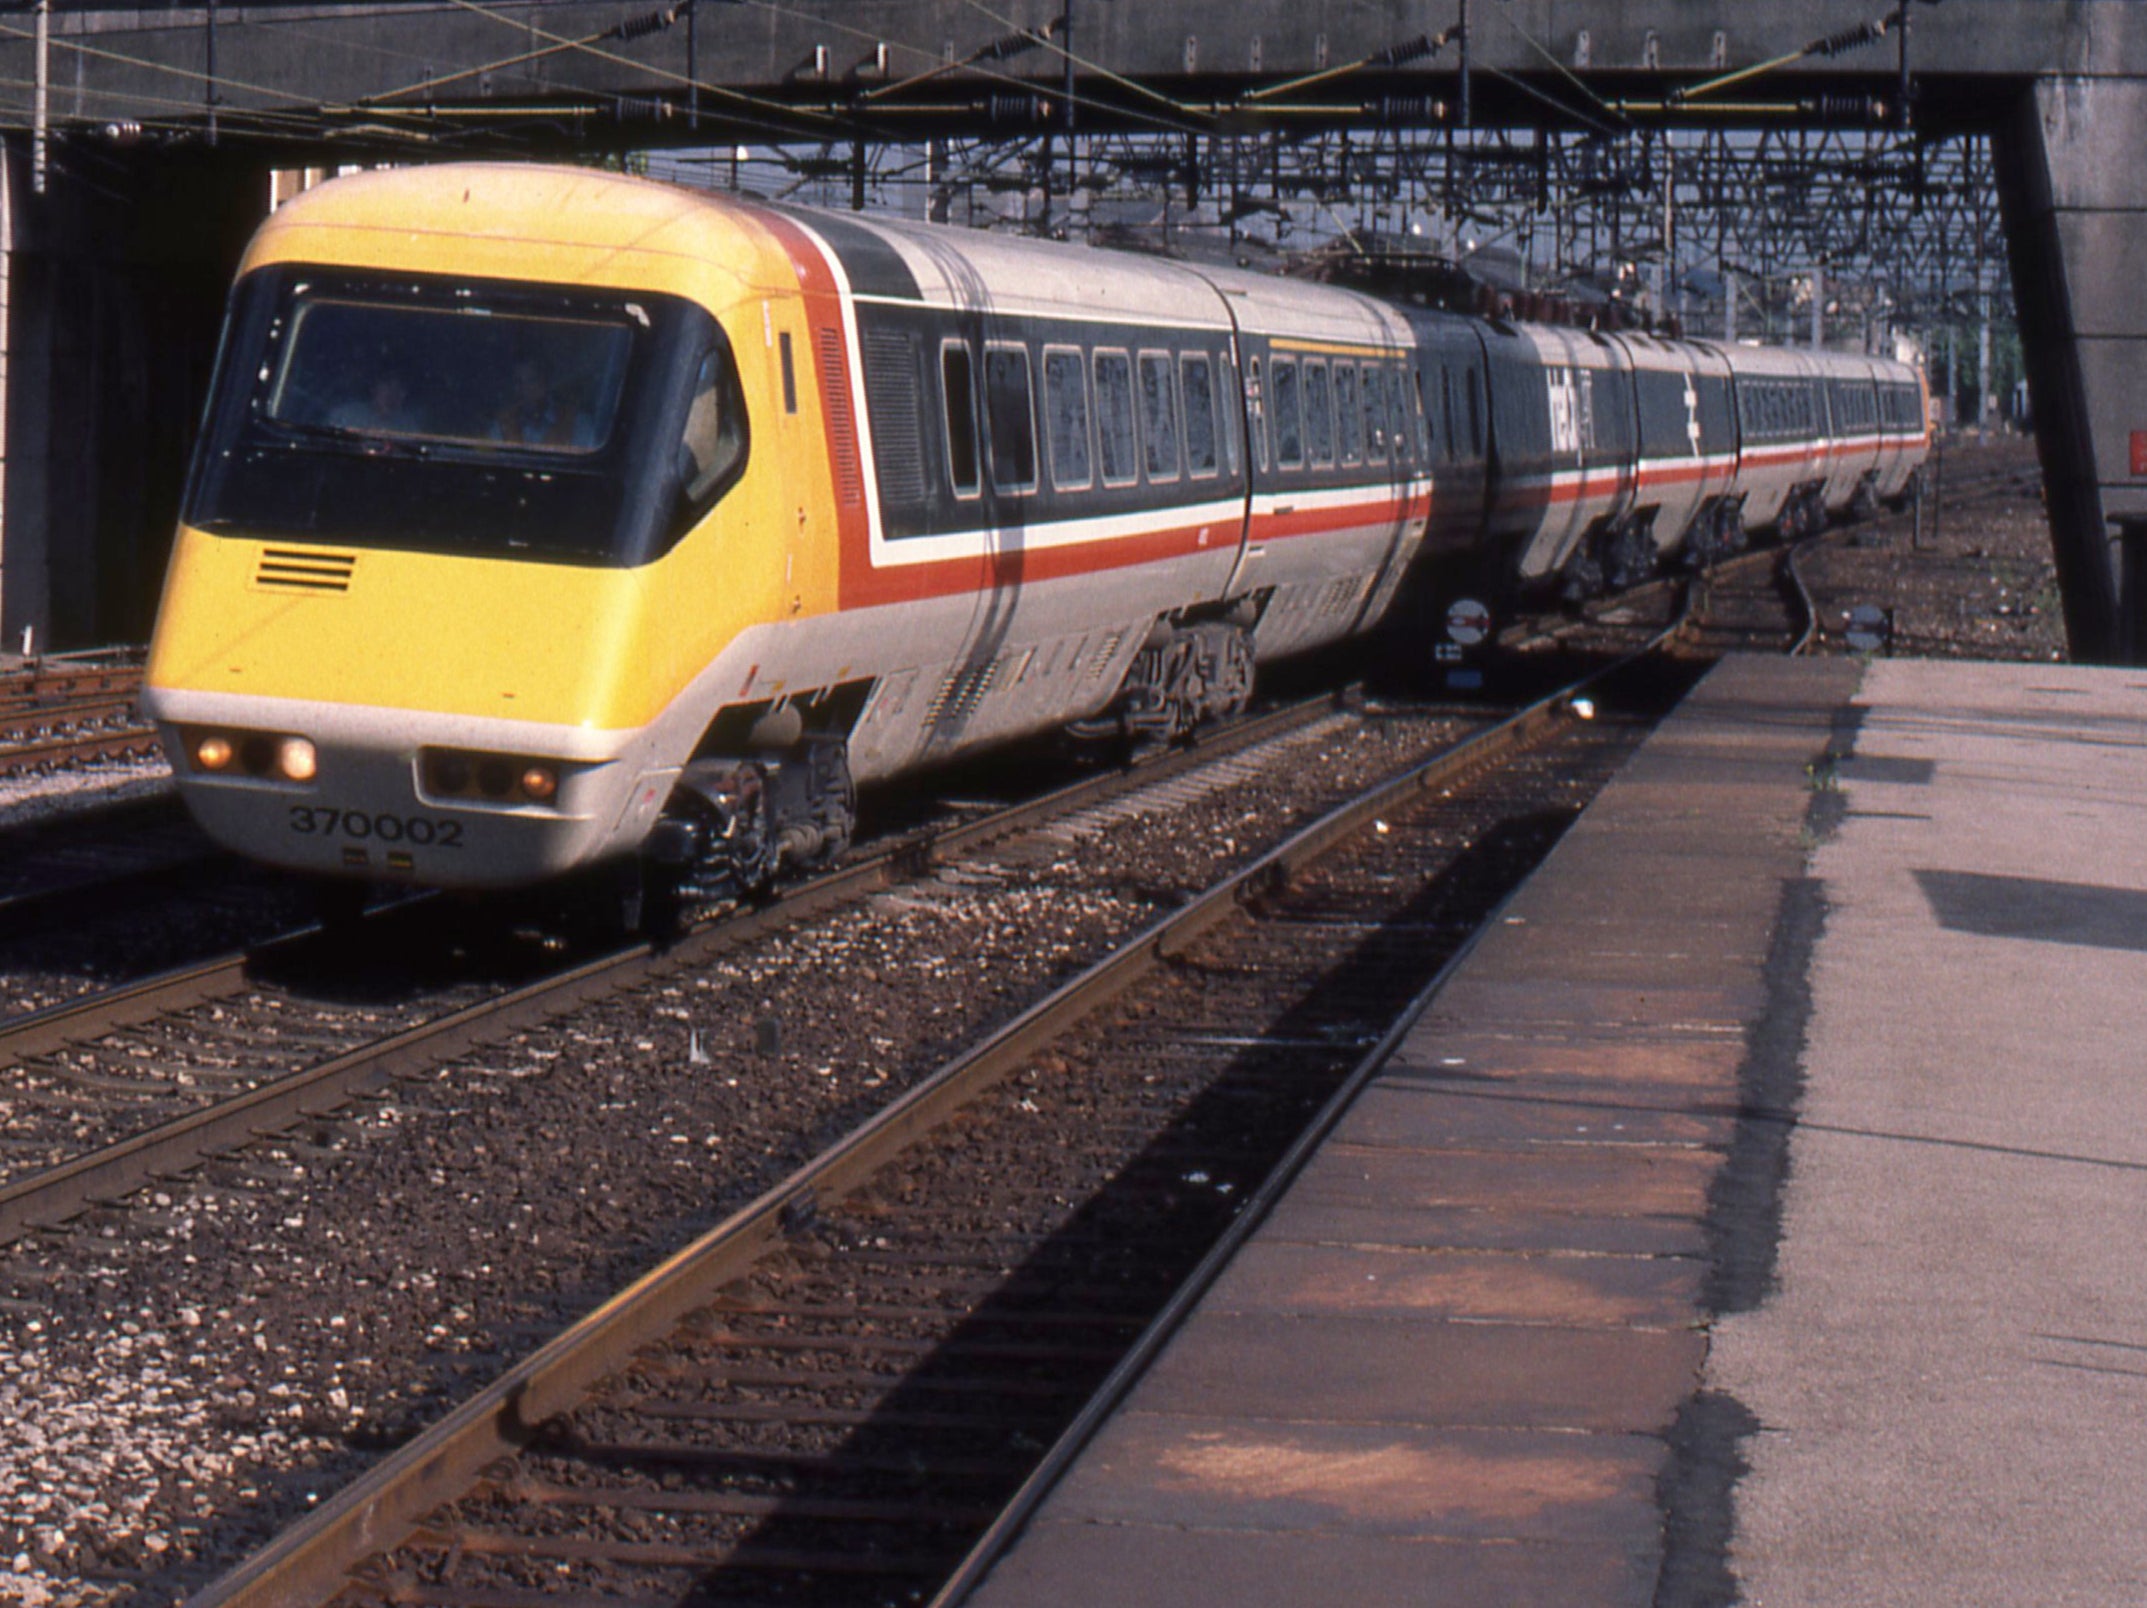 Fast track: Advanced Passenger Train, which has held the London-Glasgow speed record since 1984